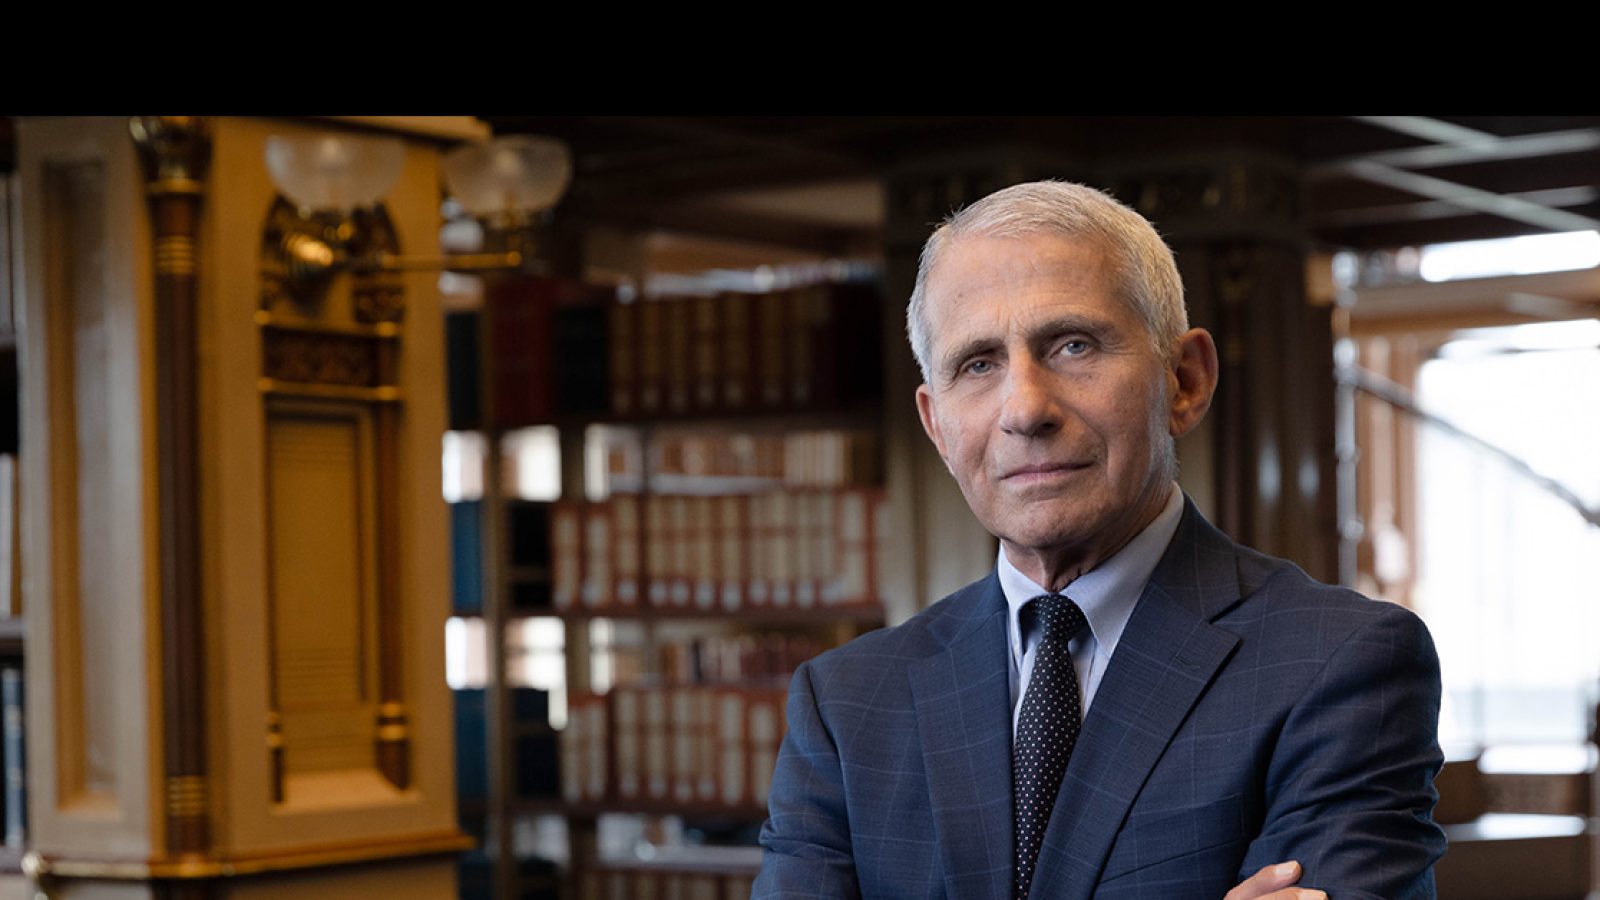 Dr. Anthony S. Fauci stands with his arms crossed in Riggs Library on Georgetown&#039;s Main Campus. He wears a navy suit with a white shirt underneath and tie, and stands in front of bookcases.